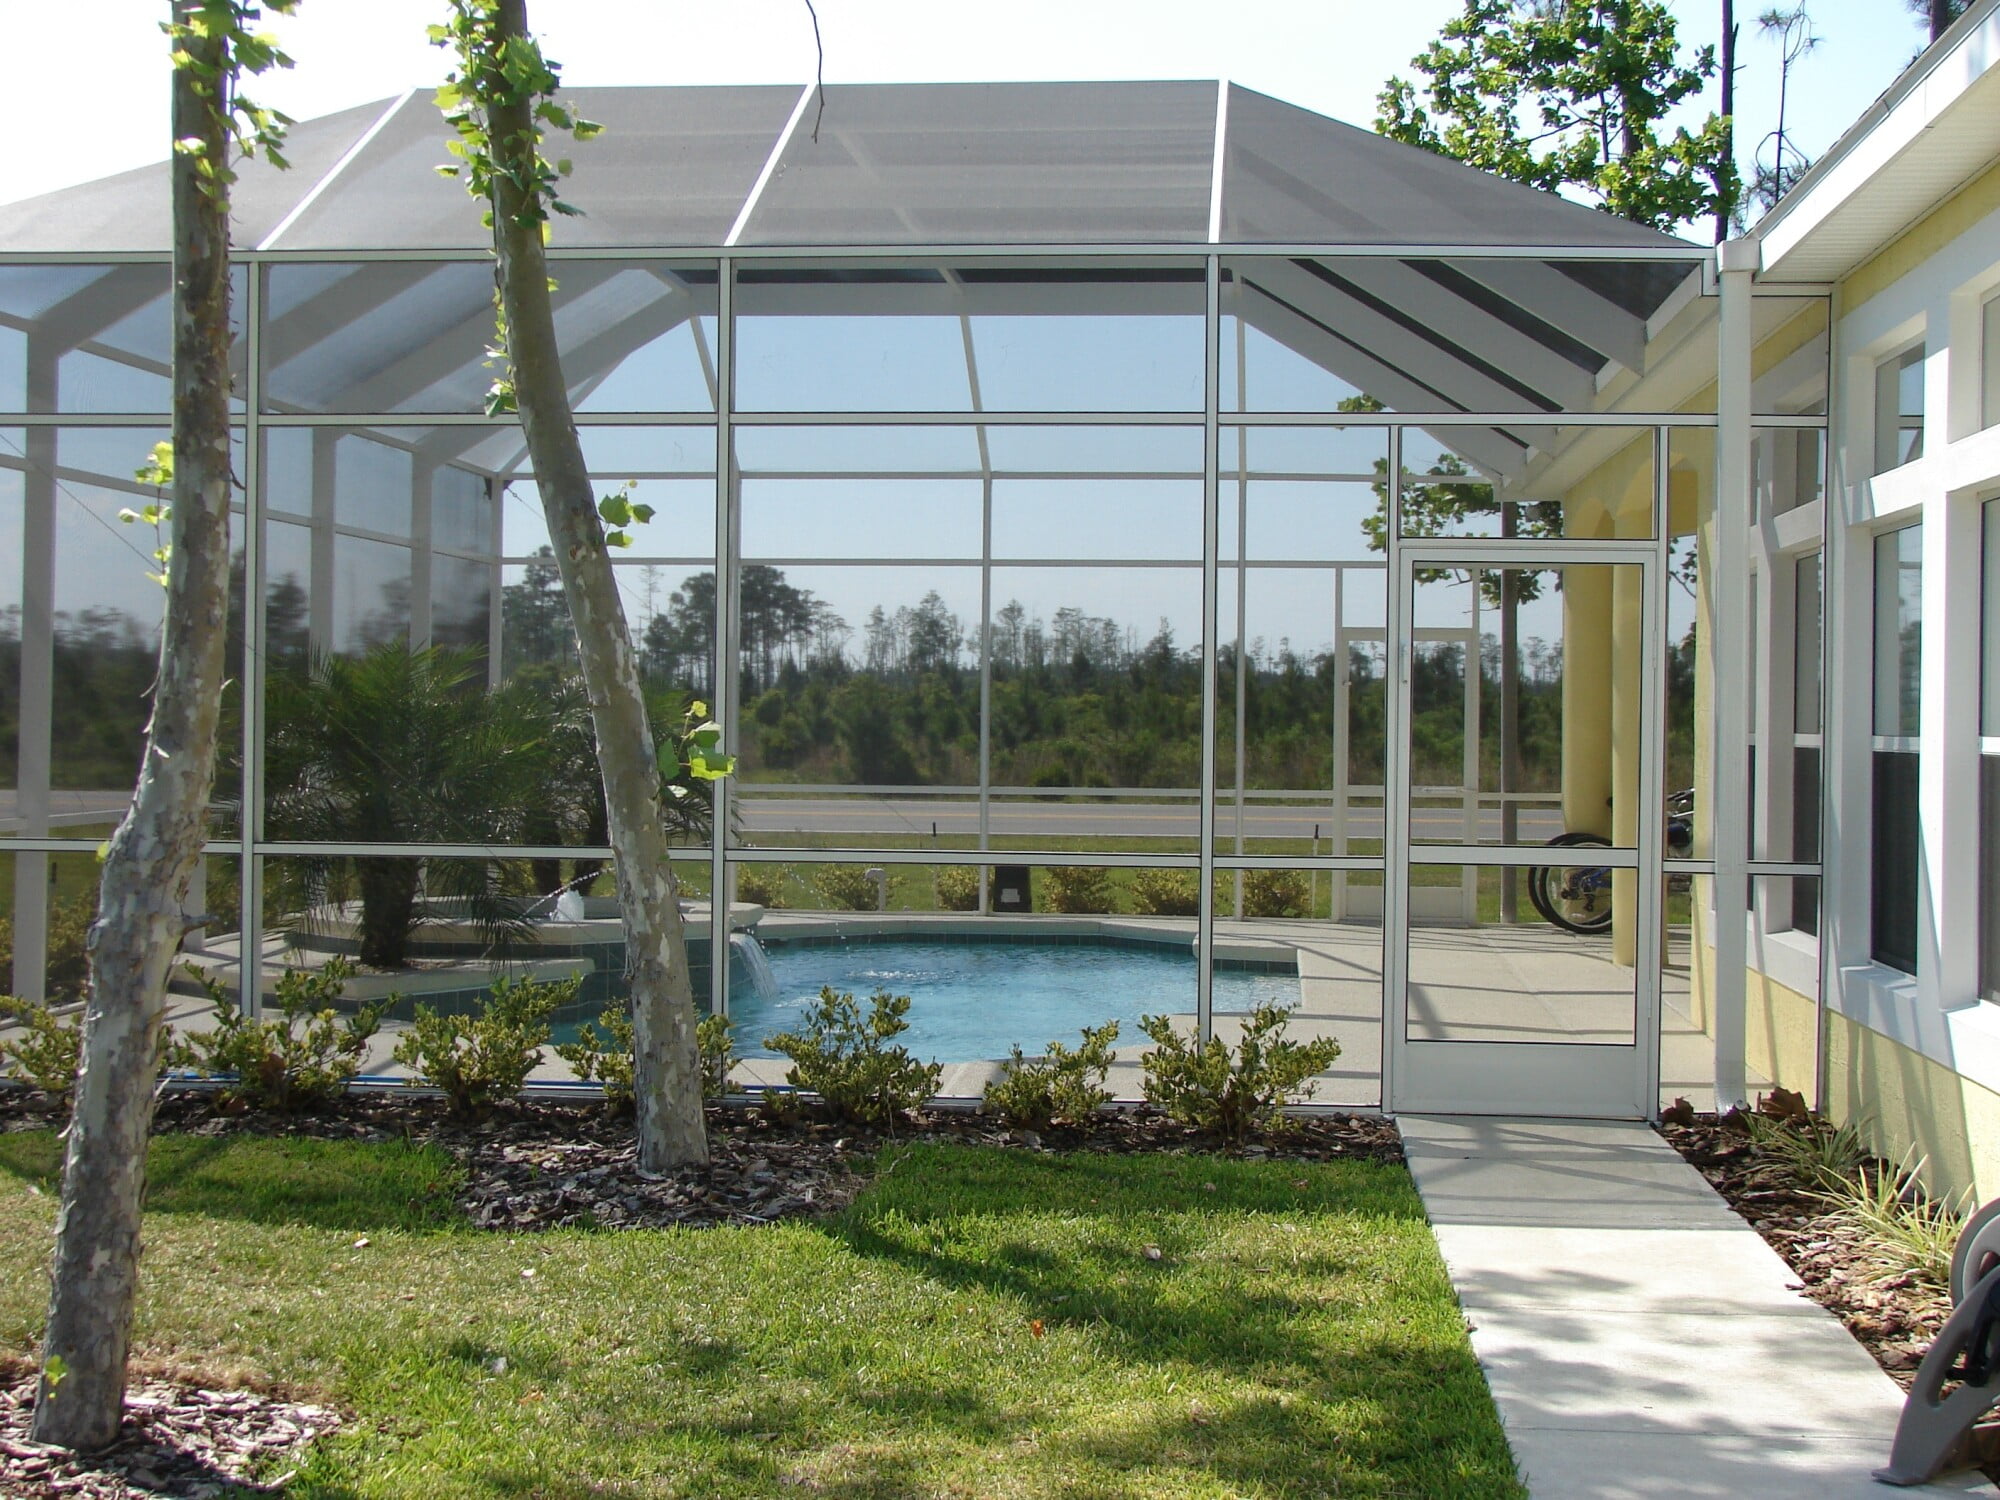 When you want the convenience of enjoying your pool all year long, click here to explore these pool enclosure ideas you'll love.